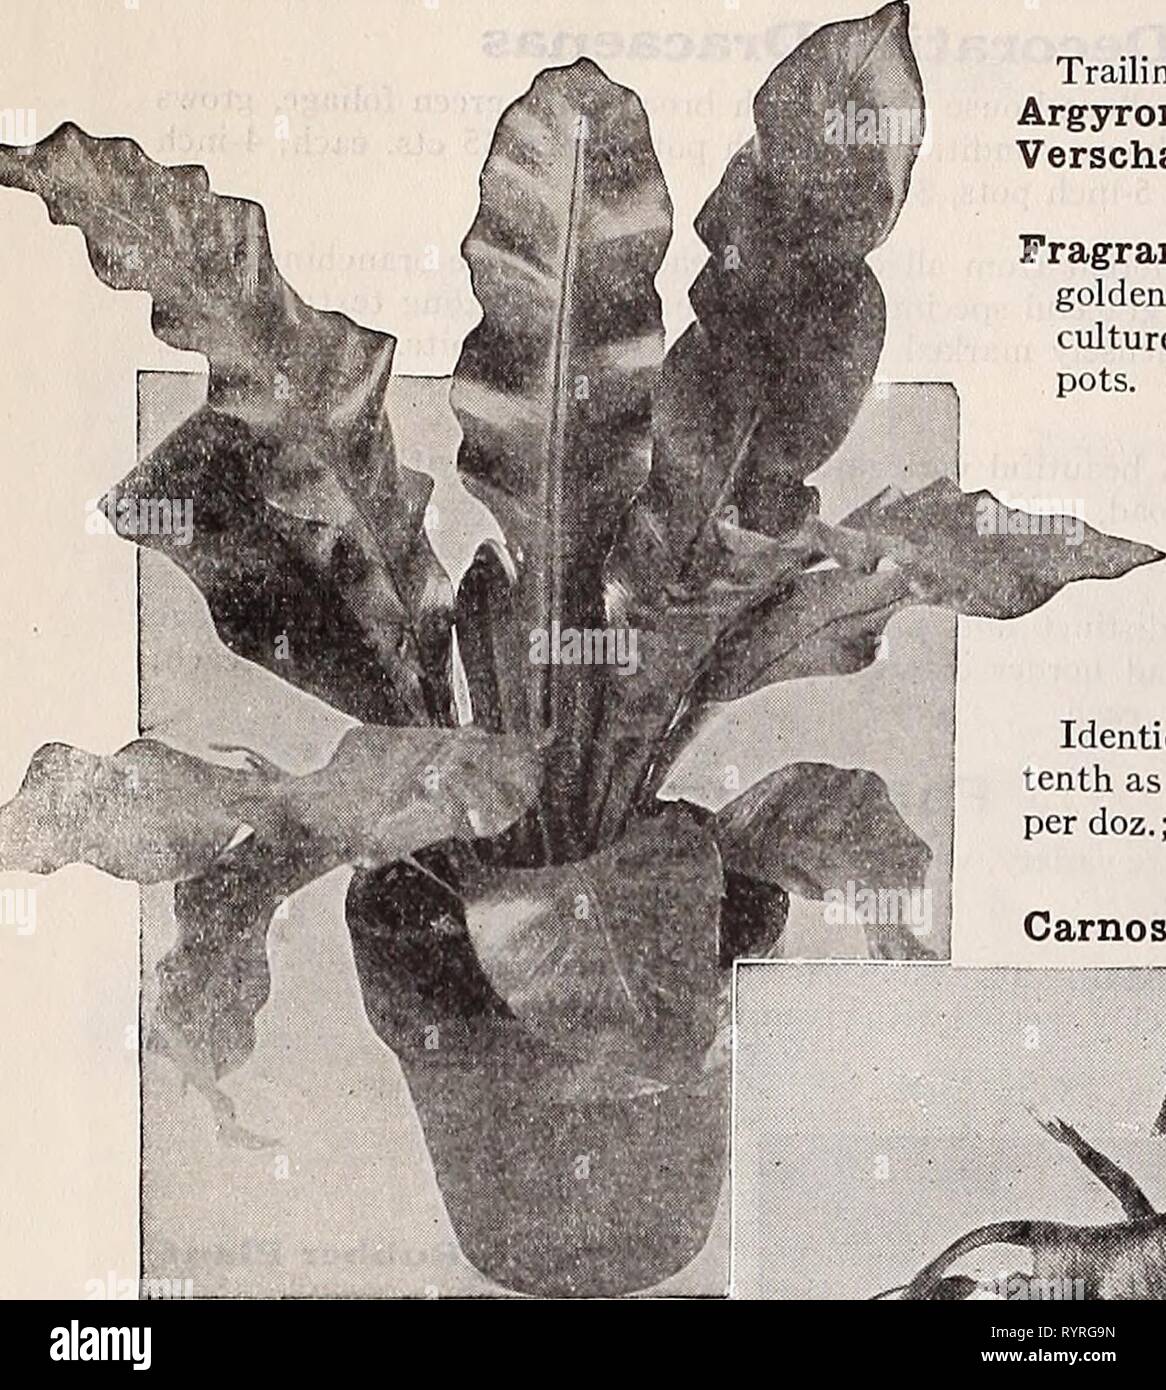 Dreer's midsummer list 1932 (1932) Dreer's midsummer list 1932 . dreersmidsummerl1932henr Year: 1932  26 DECORATIVE AND FLOWERING PLANTS FOR HOUSE AND CONSERVATORY    Platycerium Alcicorne Major Asplenium Nidus Avis Fine Ferns Adiantum Farleyense Glor- iosa (The Glory Fern). An easy-growing form of that most beautiful of all Maiden Hairs, Adiantum Farleyense. Good plants, in 3-inch pots, SO cts. each; 4-inch pots, $1.00 each. — Wrighti. A comparatively new variety of the Maiden Hair type with large fronds which are of a particularly rich pleasing green color. A good hardy variety suitable for  Stock Photo